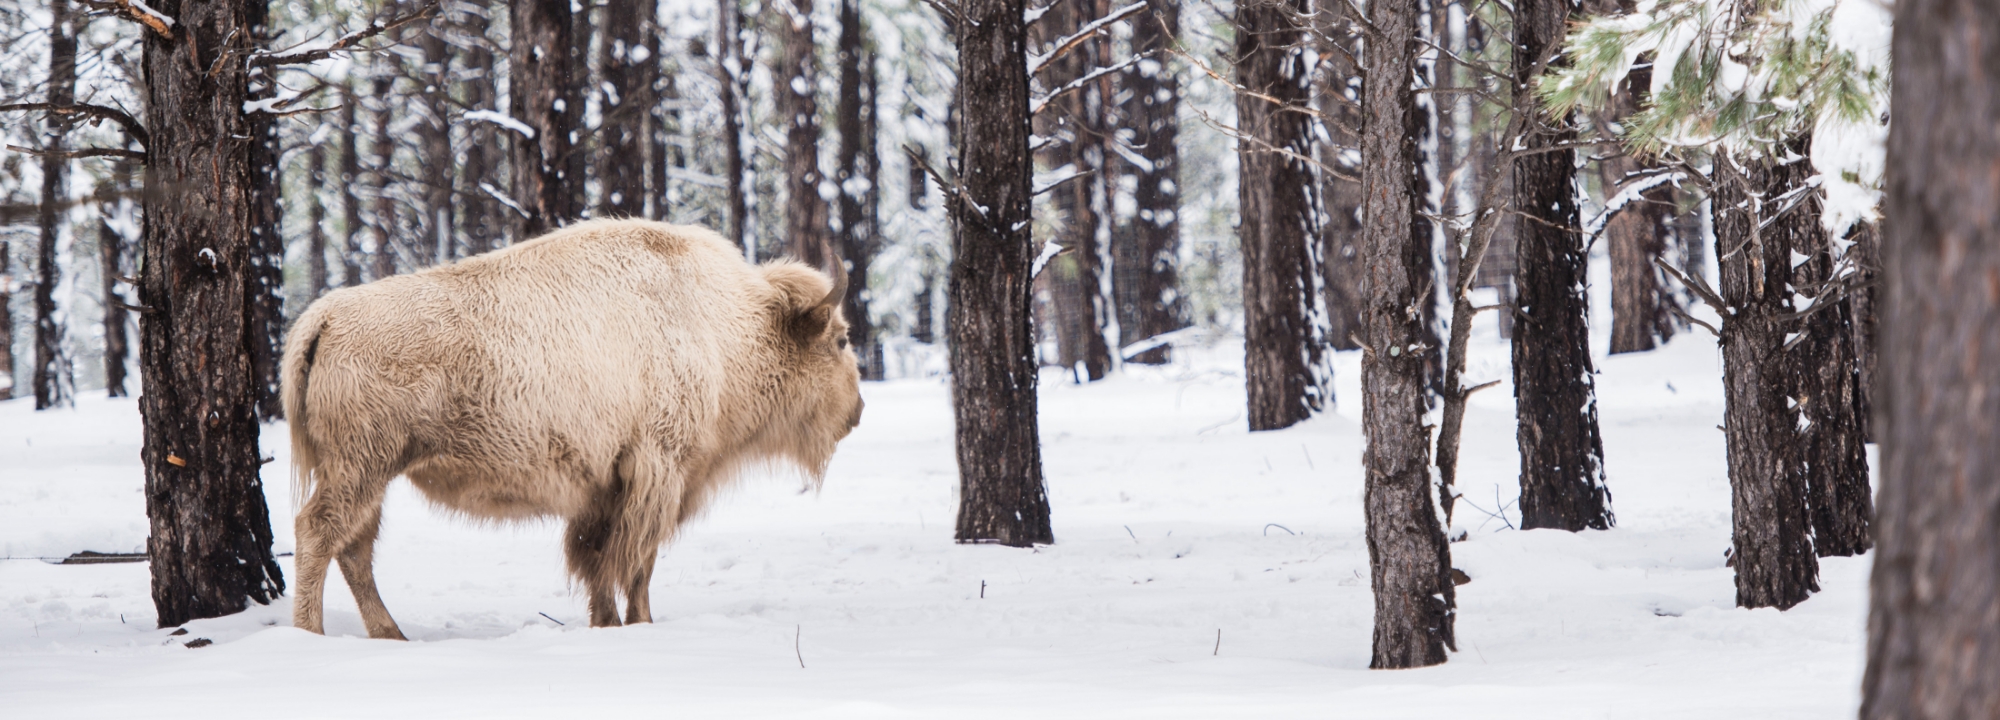 Image o f a white buffalo standing in the snow amongst the trees.